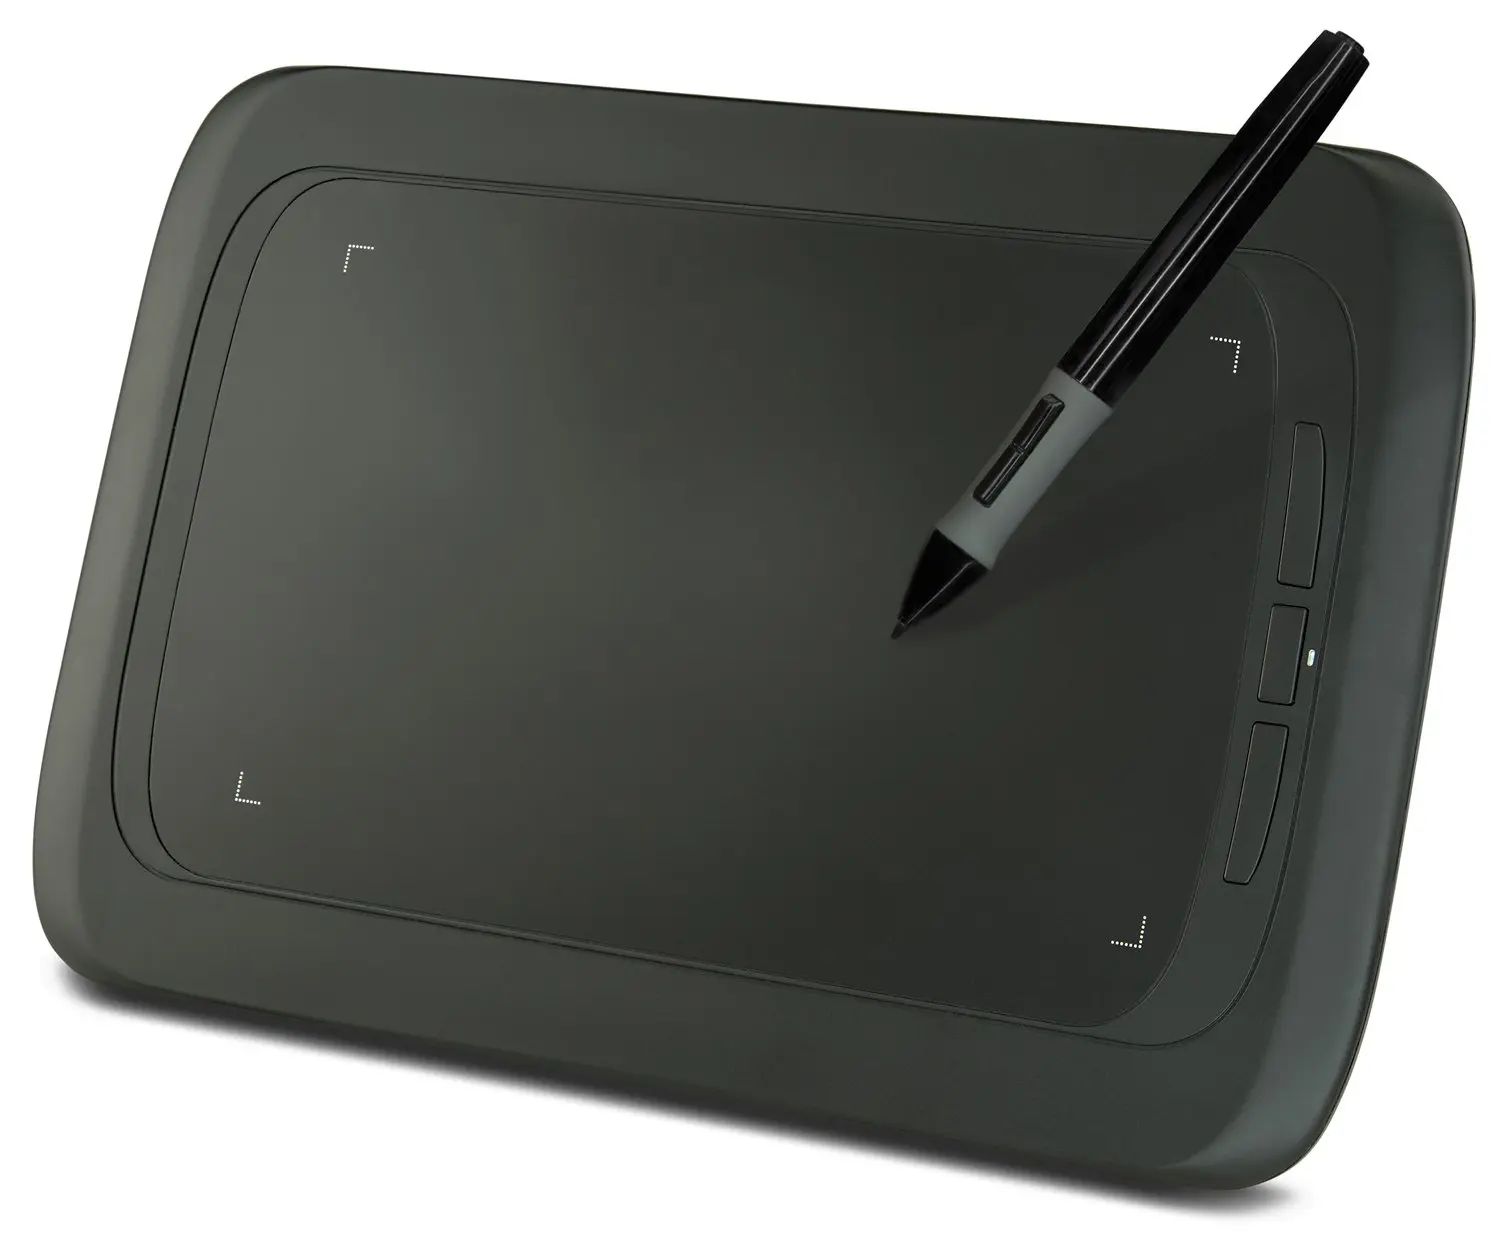 turcom graphics tablet drawing touch pen for windows and mac – 5.5 